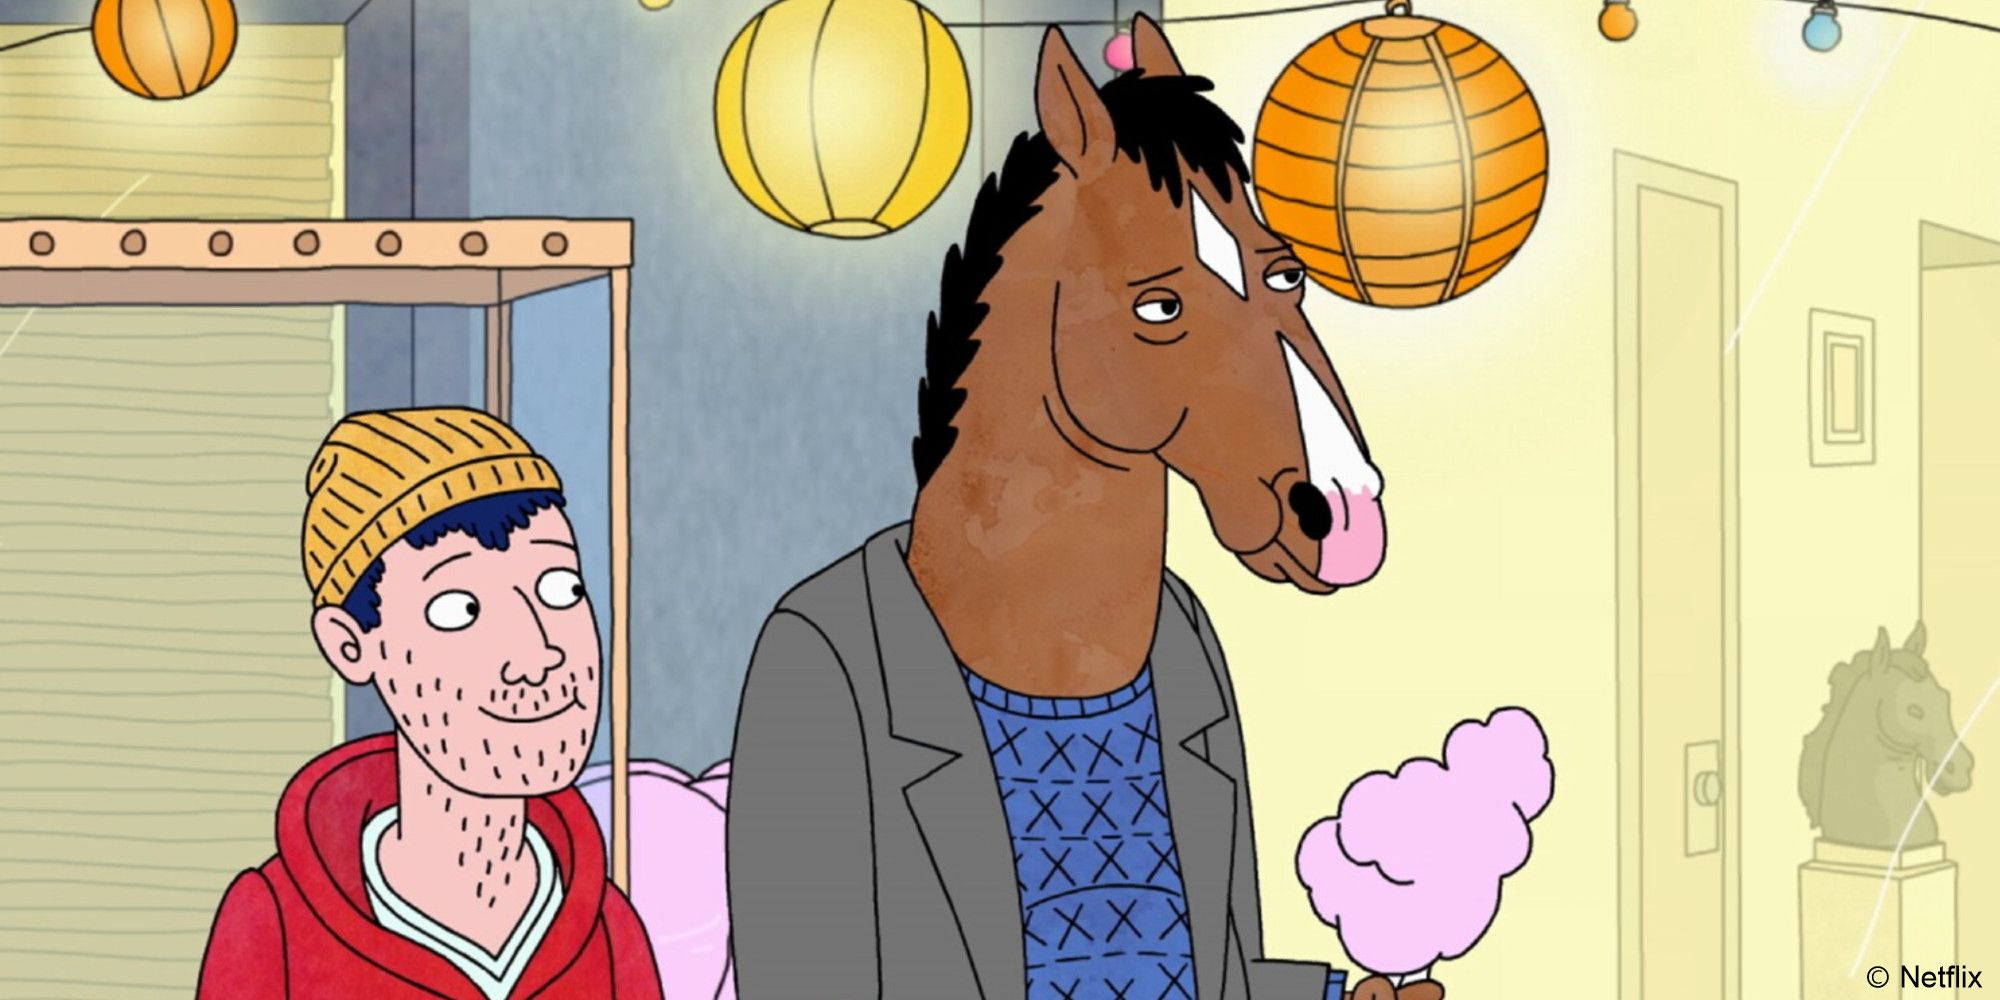 BoJack-Horseman_Todd-and-BoJack-stand-together-at-a-party-BoJack-looking-unamused-1